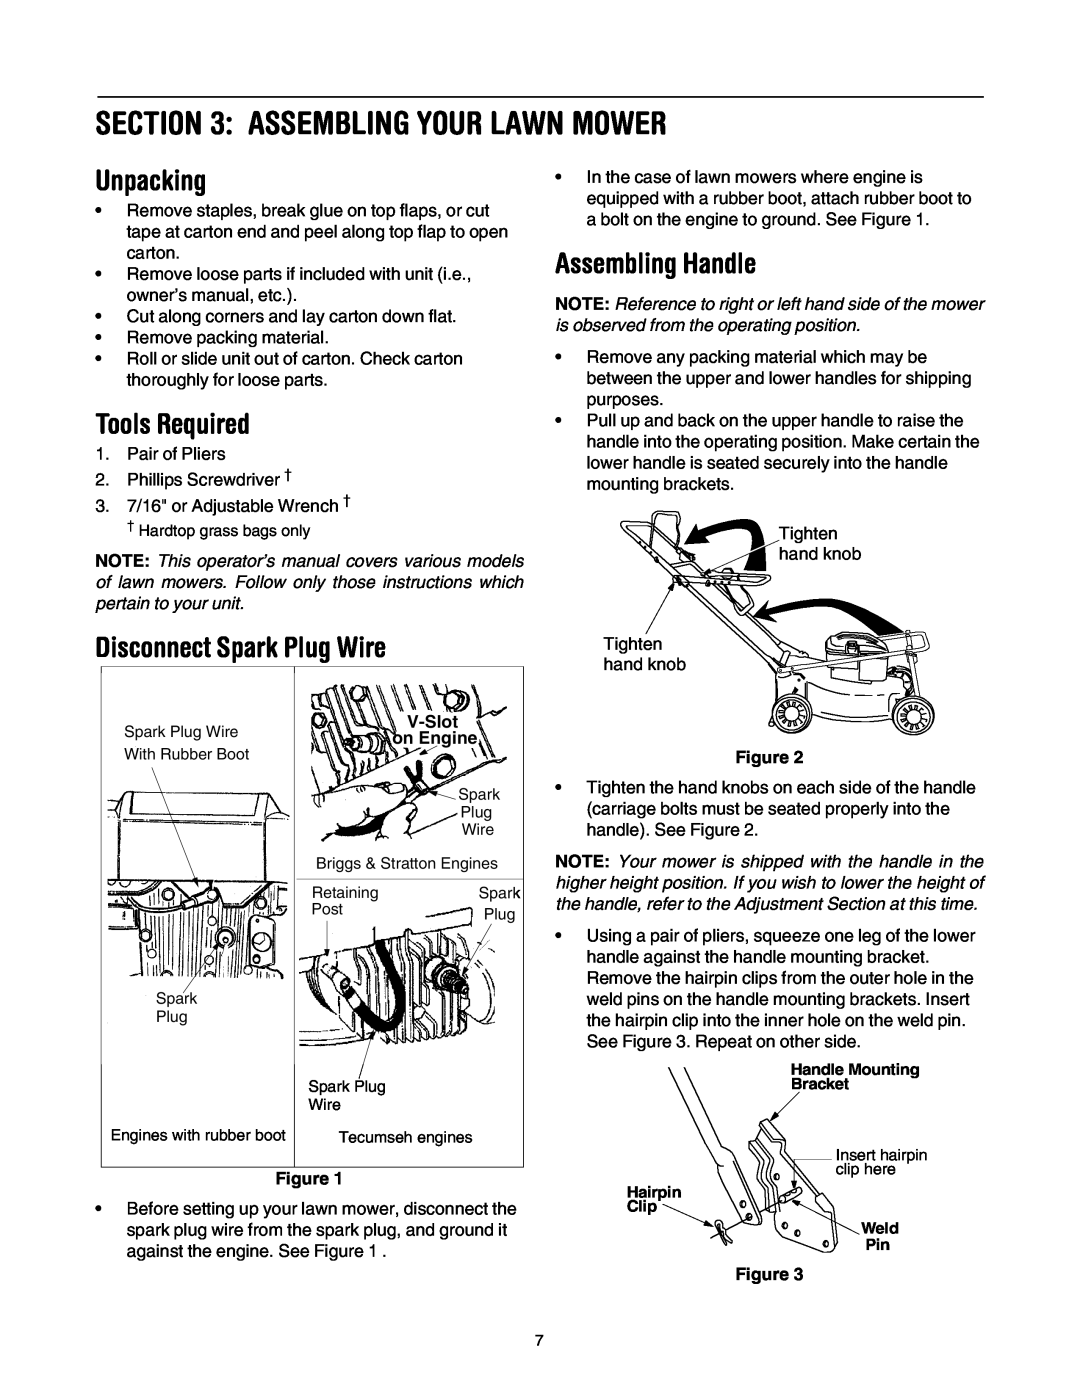 Yard Machines through 429, 410 manual Assembling Your Lawn Mower, Unpacking, Tools Required, Disconnect Spark Plug Wire 